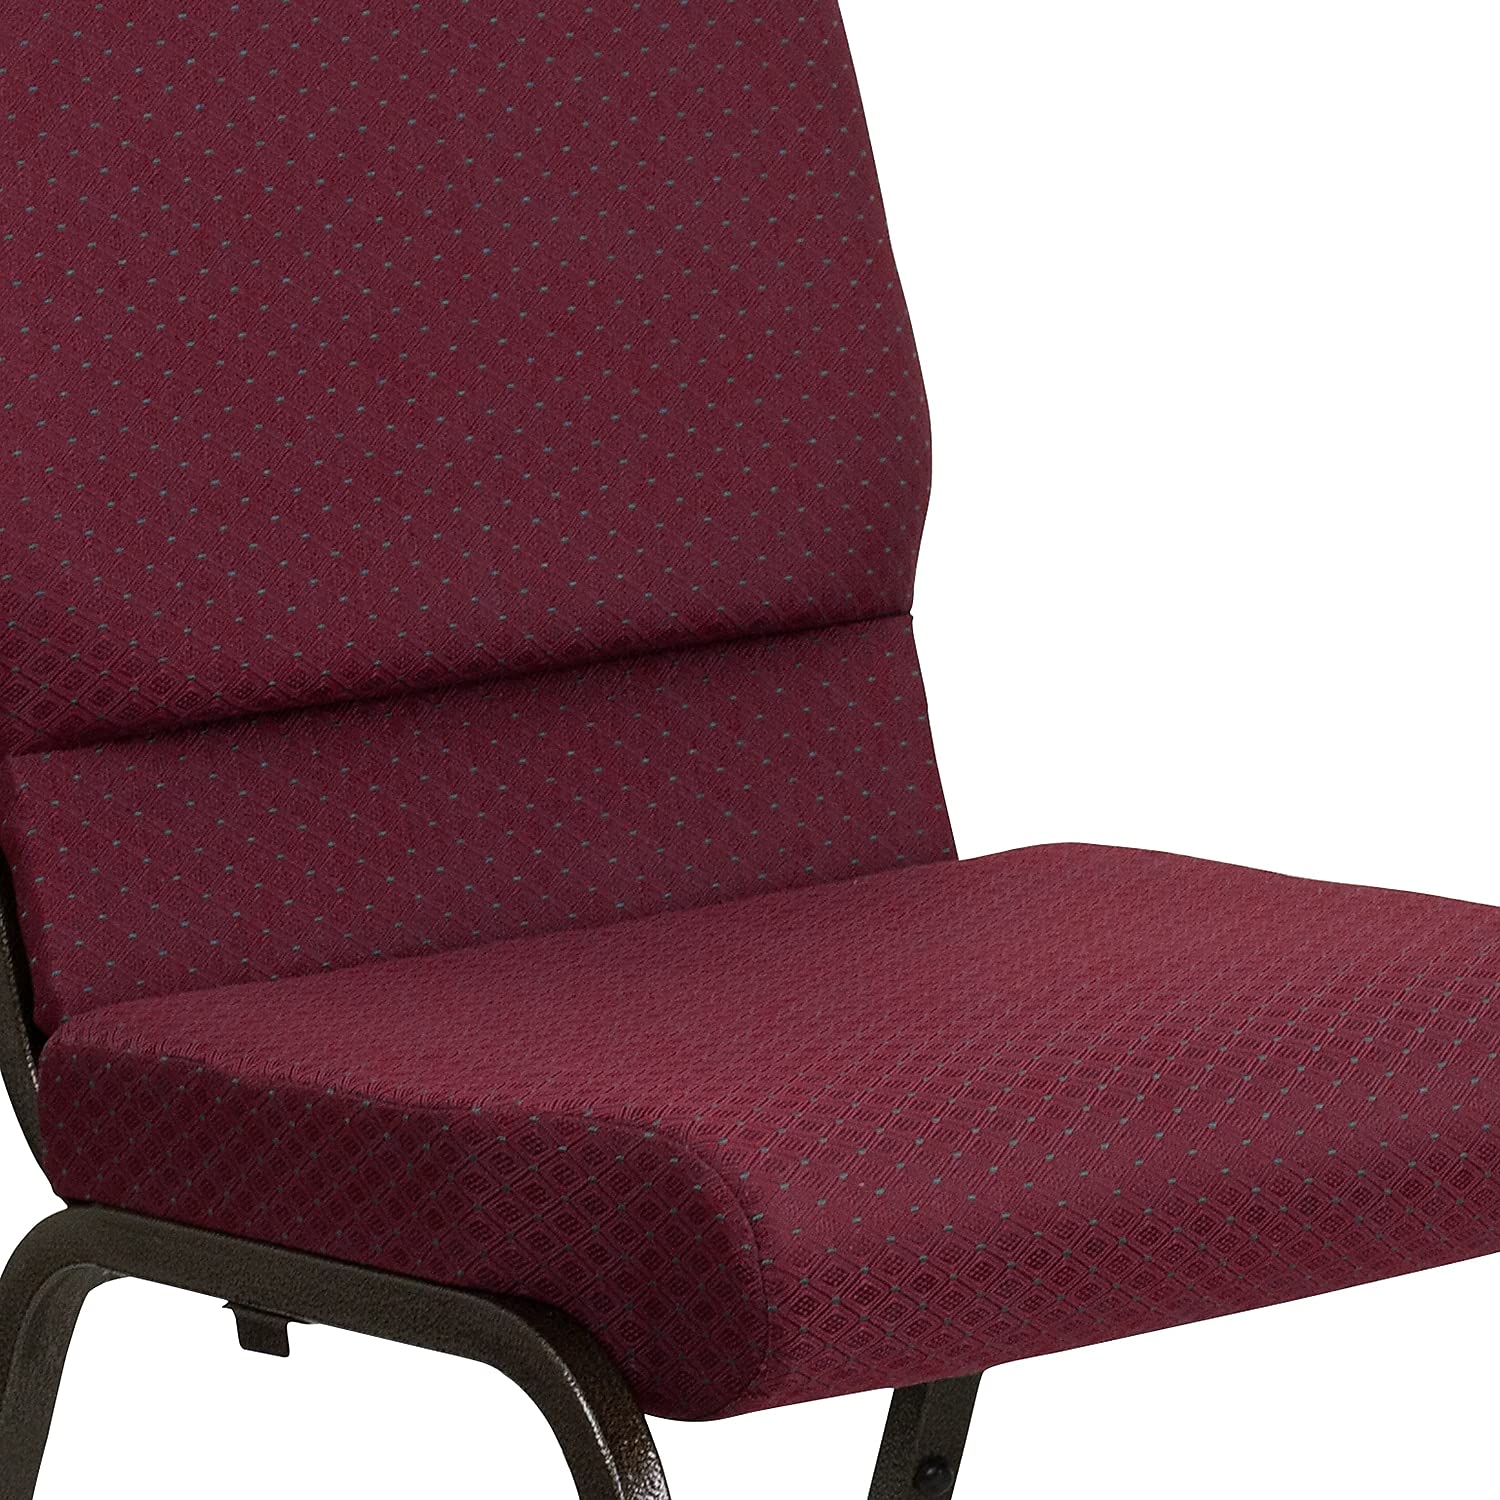 Flash Furniture 4 Pack HERCULES Series 18.5''W Stacking Church Chair in Burgundy Patterned Fabric - Gold Vein Frame